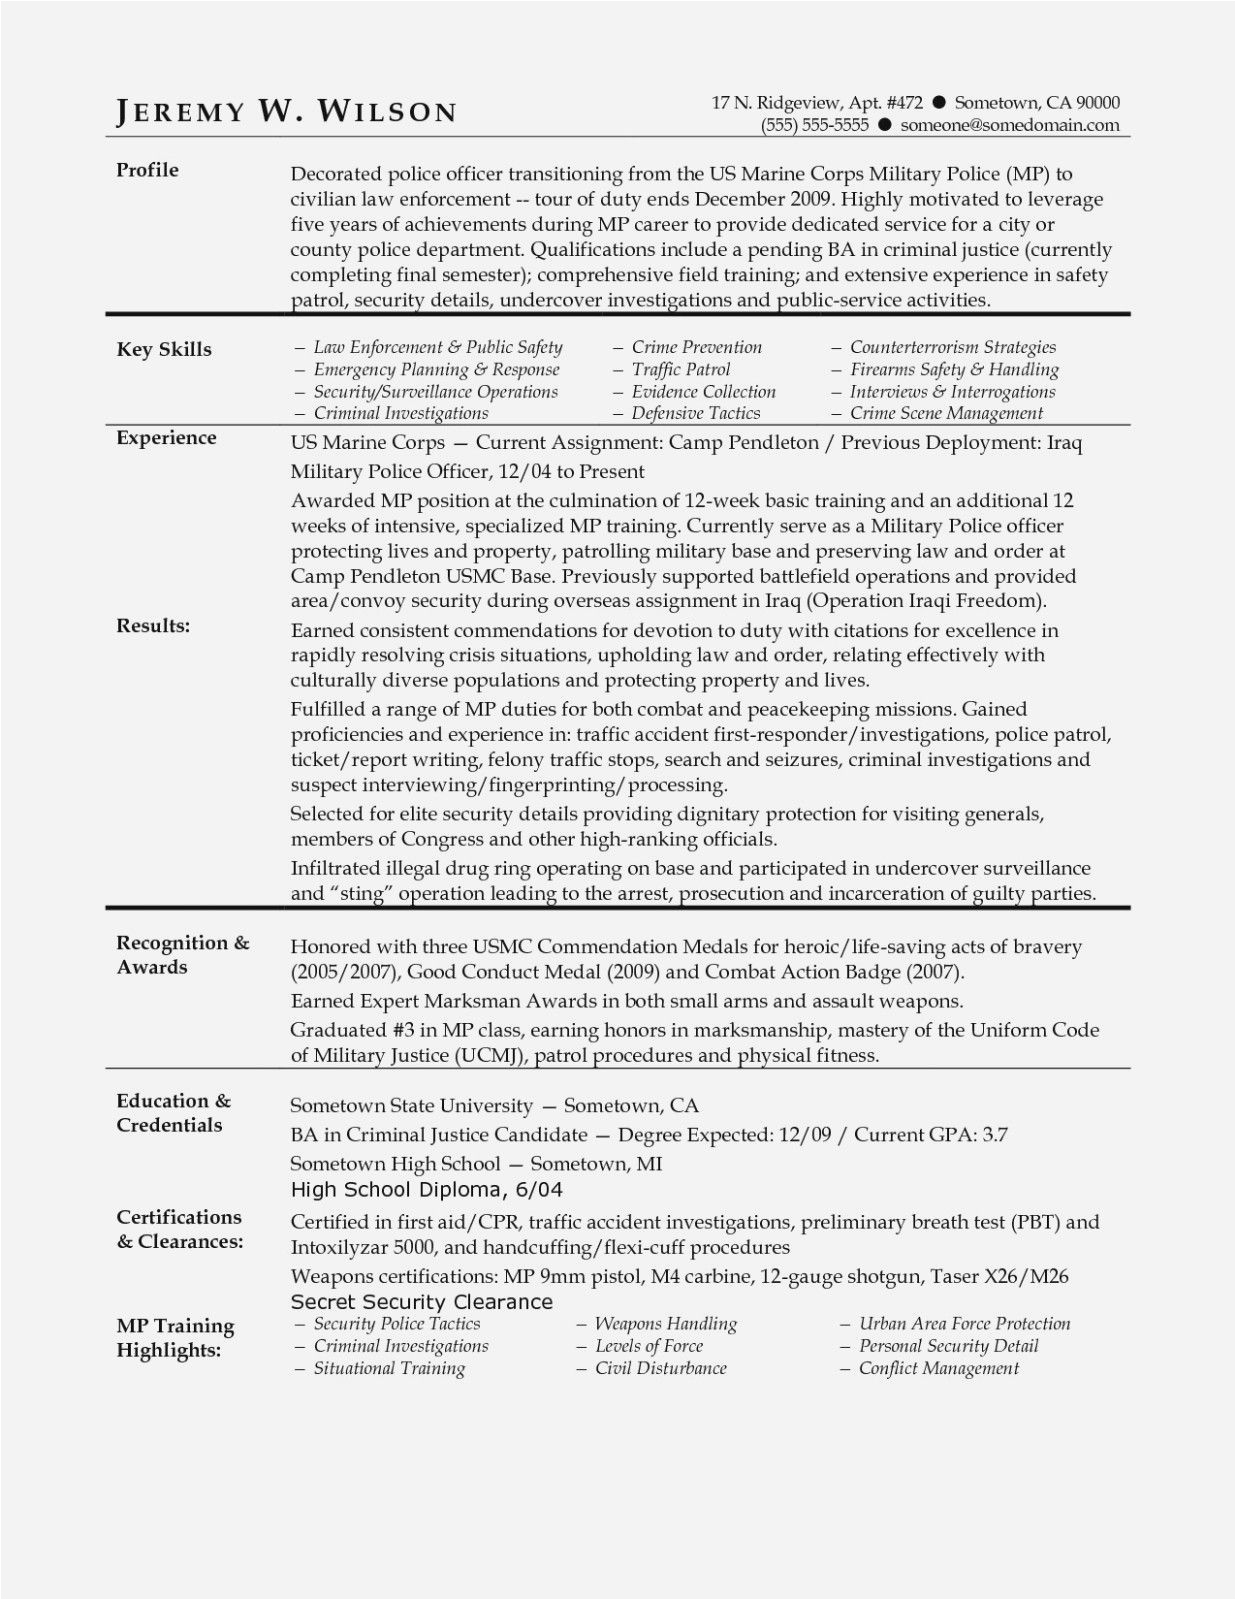 Sample Resume for Police Officer with No Experience Police Ficer Resume Samples No Experience Bank Of Resume